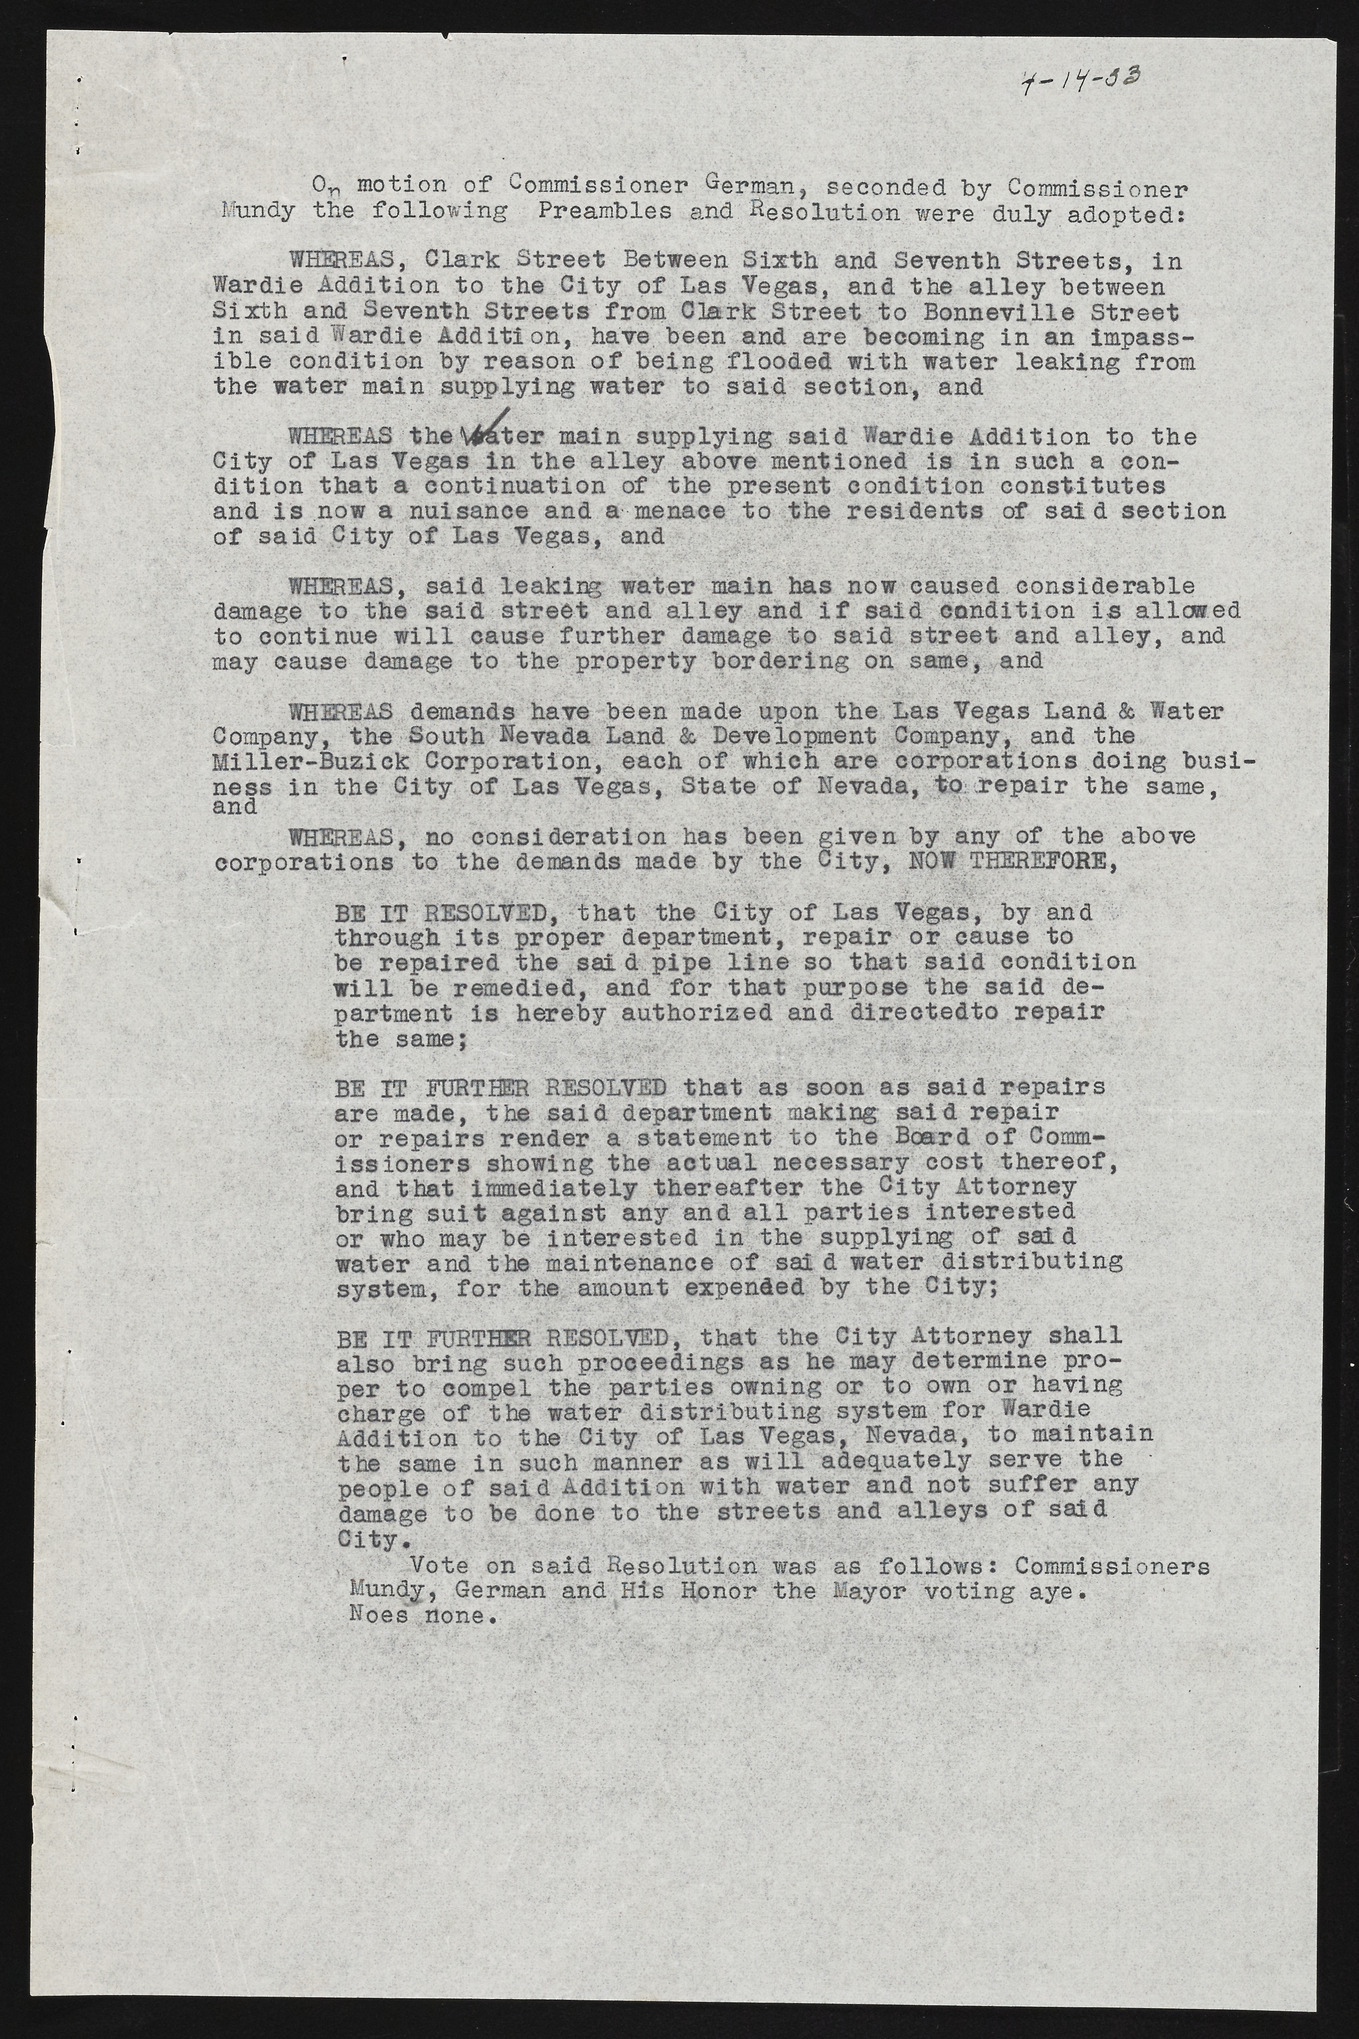 Las Vegas City Commission Minutes, May 14, 1929 to February 11, 1937, lvc000003-292